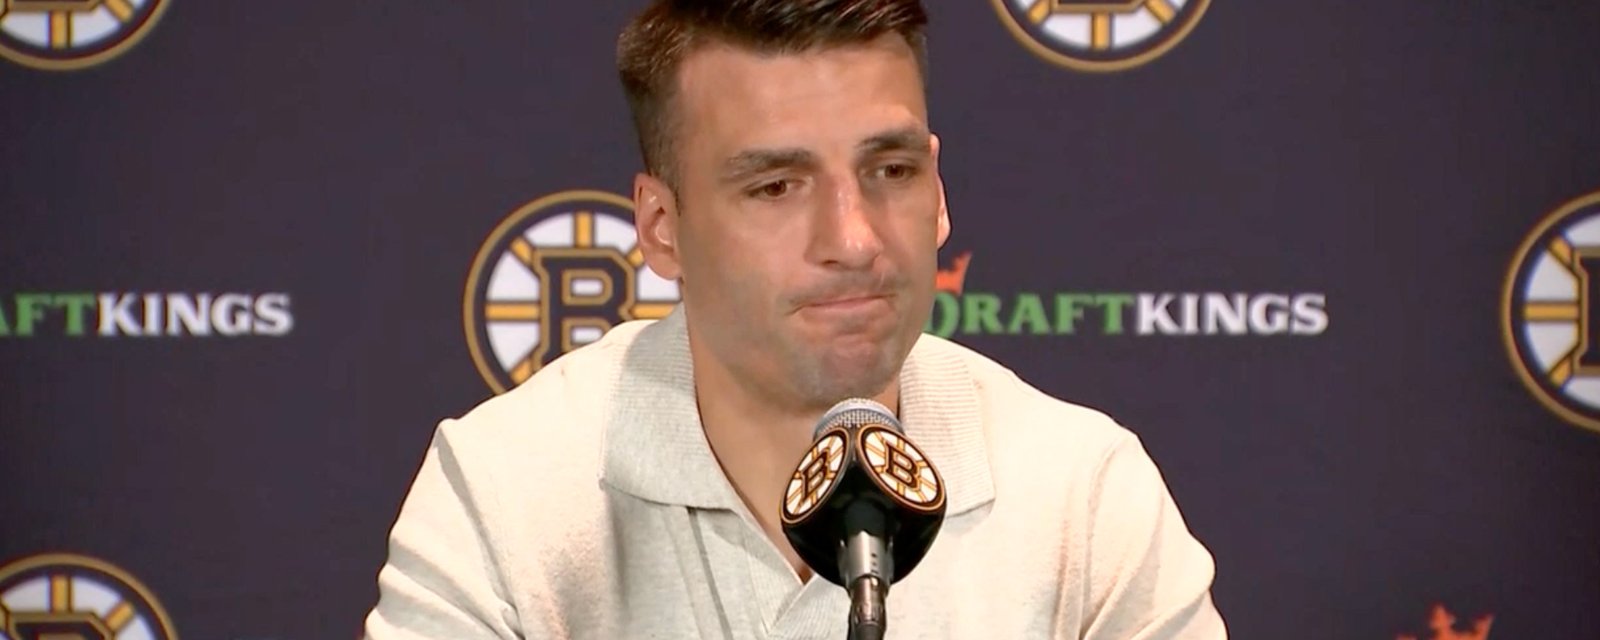 Patrice Bergeron gets emotional in retirement press conference